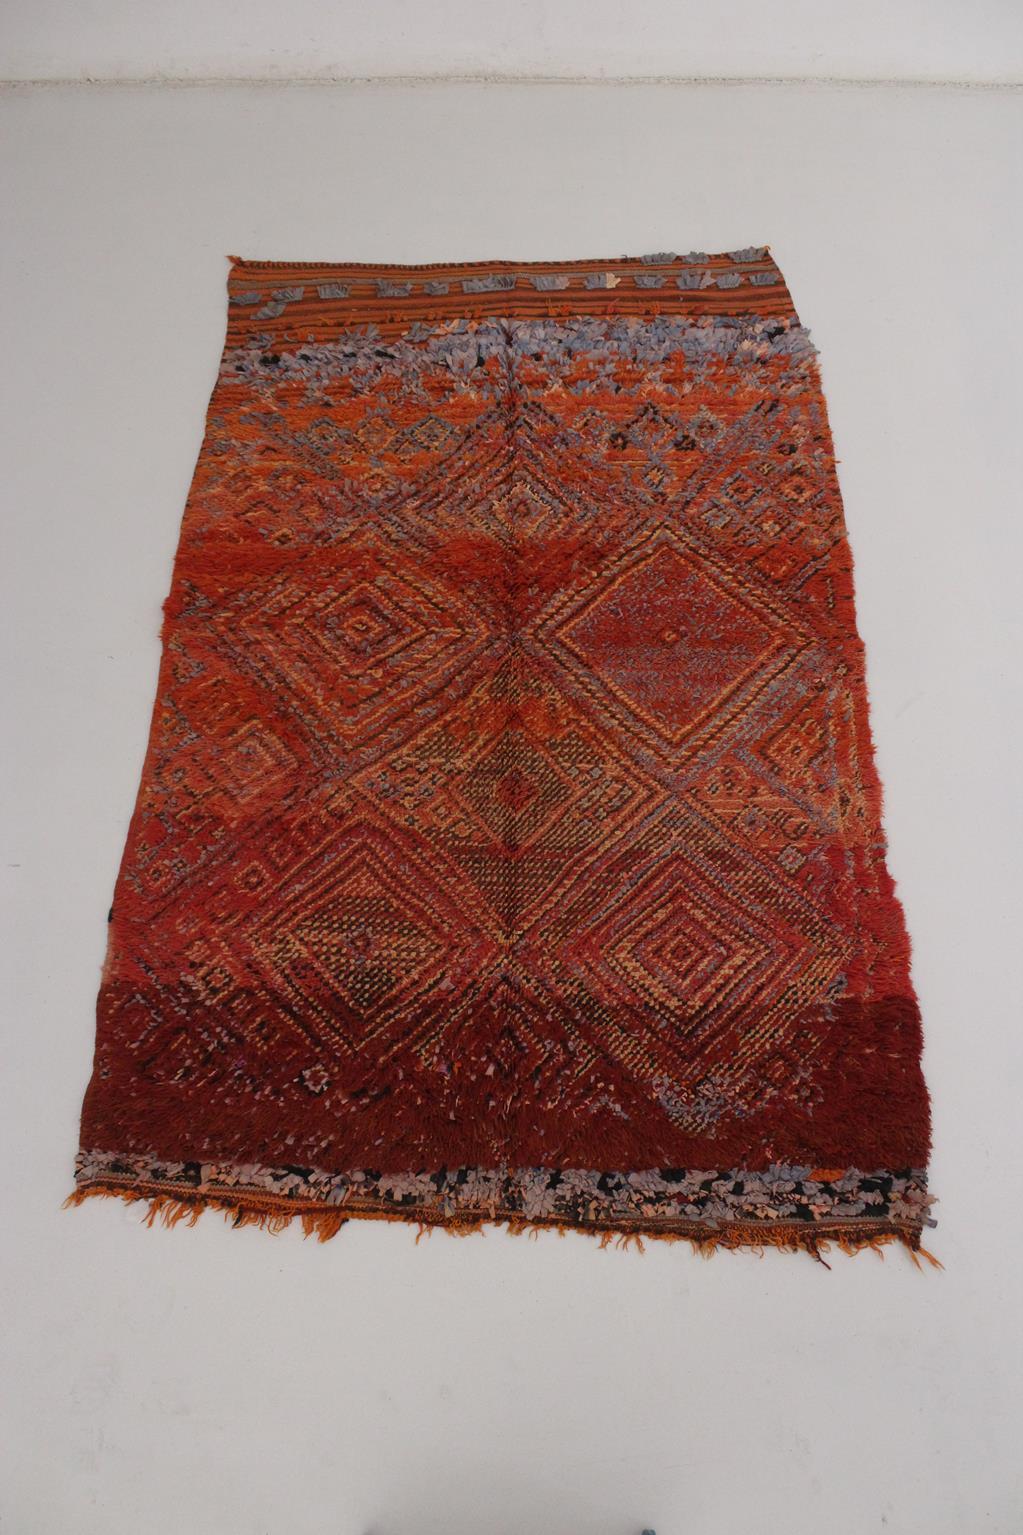 This is definitely a collector rug! I've had some of these beautiful, vintage Beni Mguild rugs in the selection, but I never came accross one with such an extravagant work on the texture! The rug mostly shows low to medium pile -there's also a